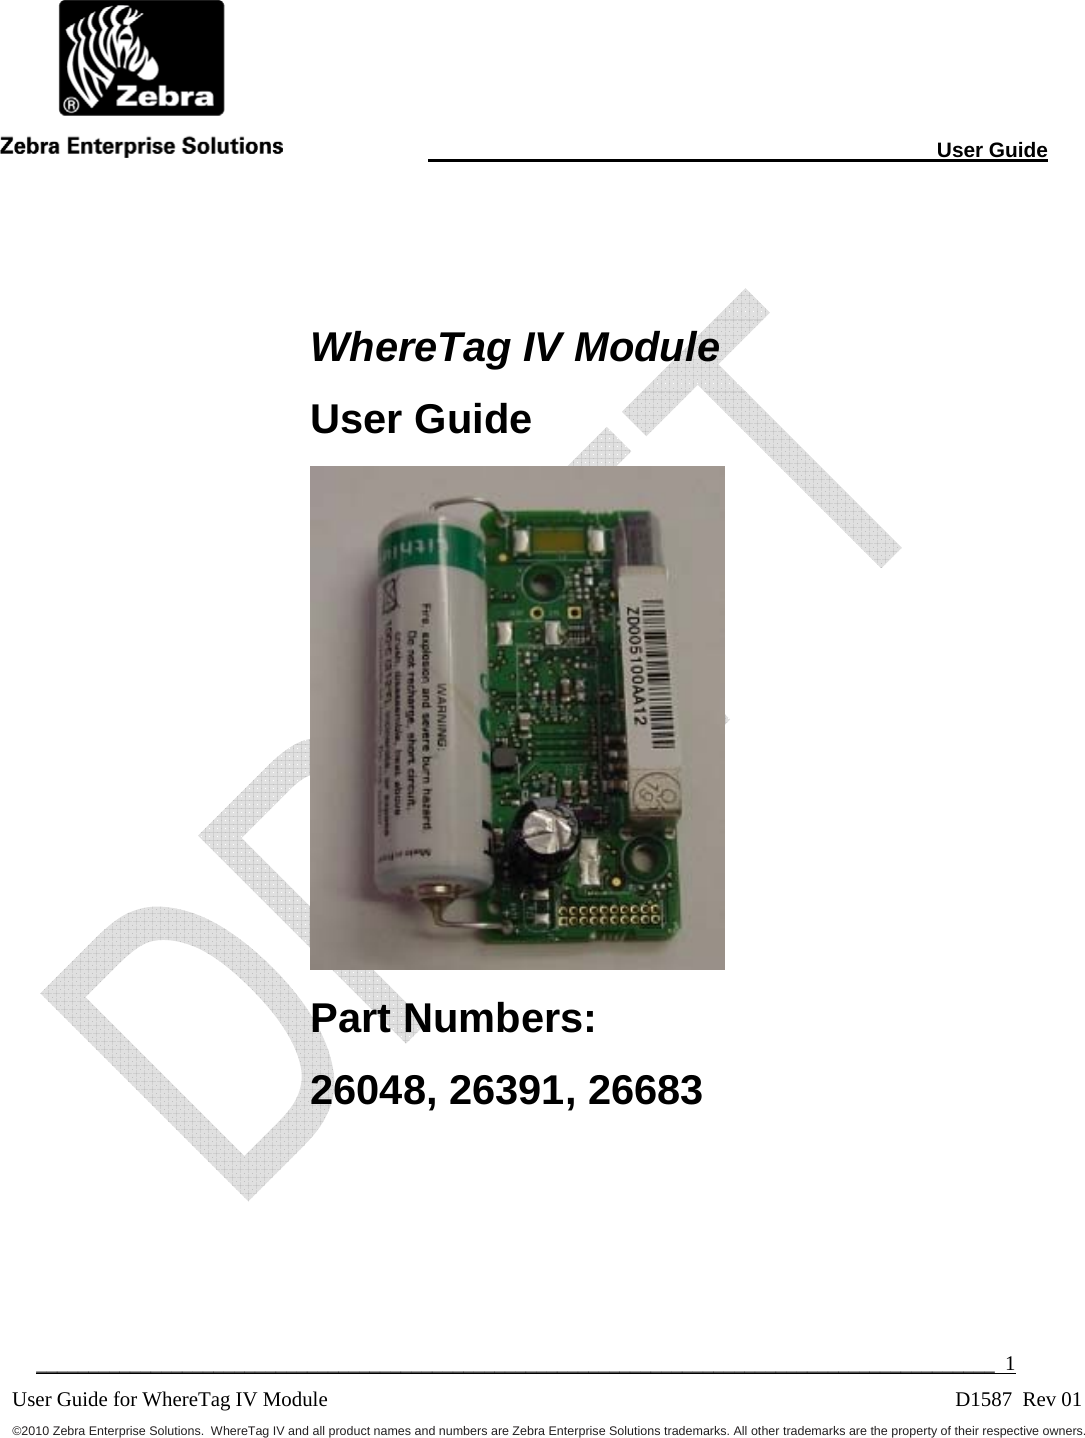                                                                                                                       User Guide  ____________________________________________________________________________________________  1 User Guide for WhereTag IV Module                                      D1587  Rev 01©2010 Zebra Enterprise Solutions.  WhereTag IV and all product names and numbers are Zebra Enterprise Solutions trademarks. All other trademarks are the property of their respective owners.   WhereTag IV Module User Guide  Part Numbers:  26048, 26391, 26683     